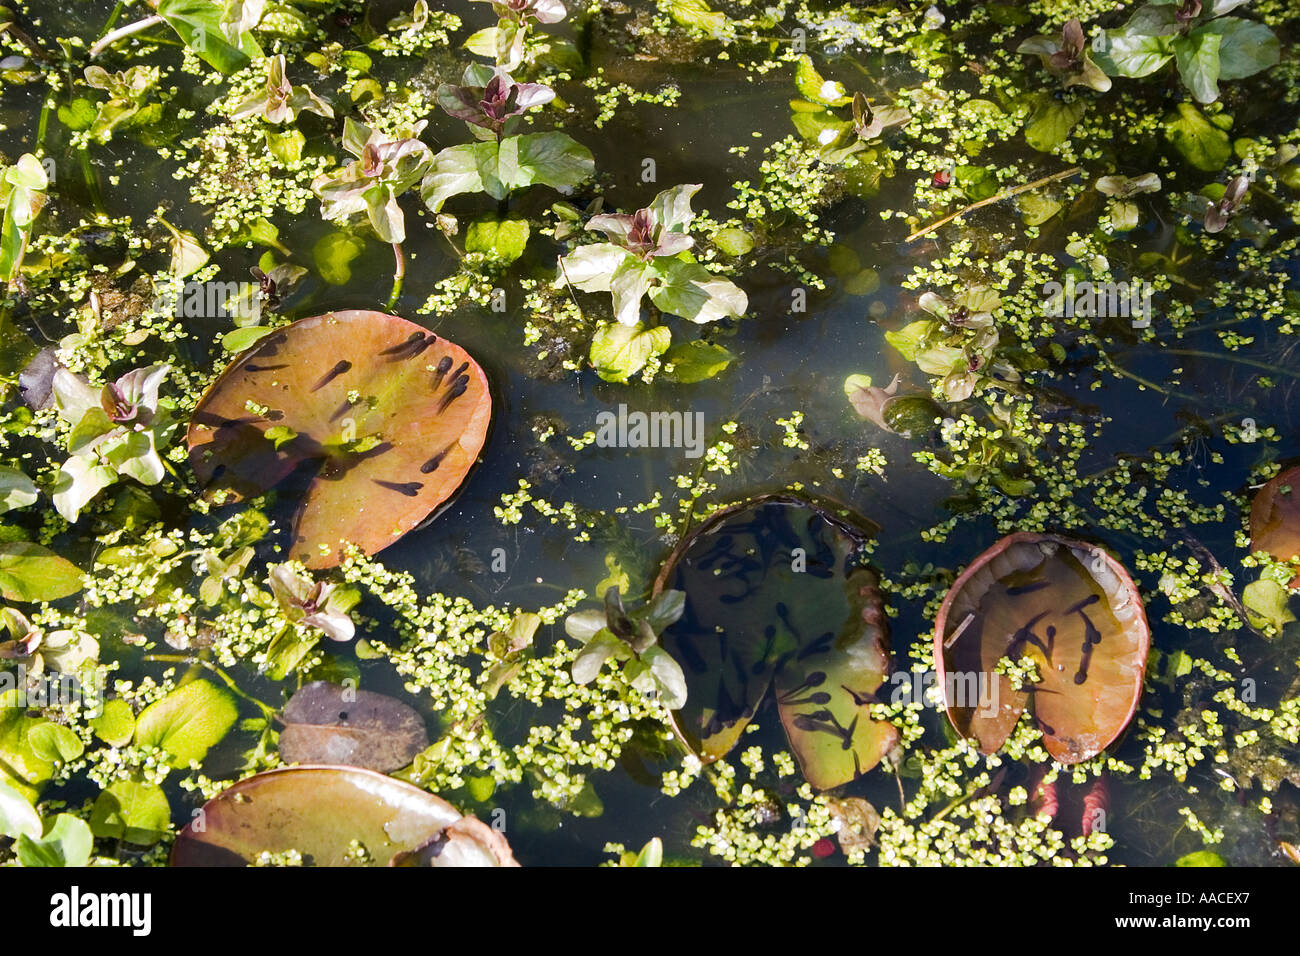 Newly hatched frog rana temporaria tadpoles basking in sunlit lily pads in garden pond with ramshorn snail Stock Photo